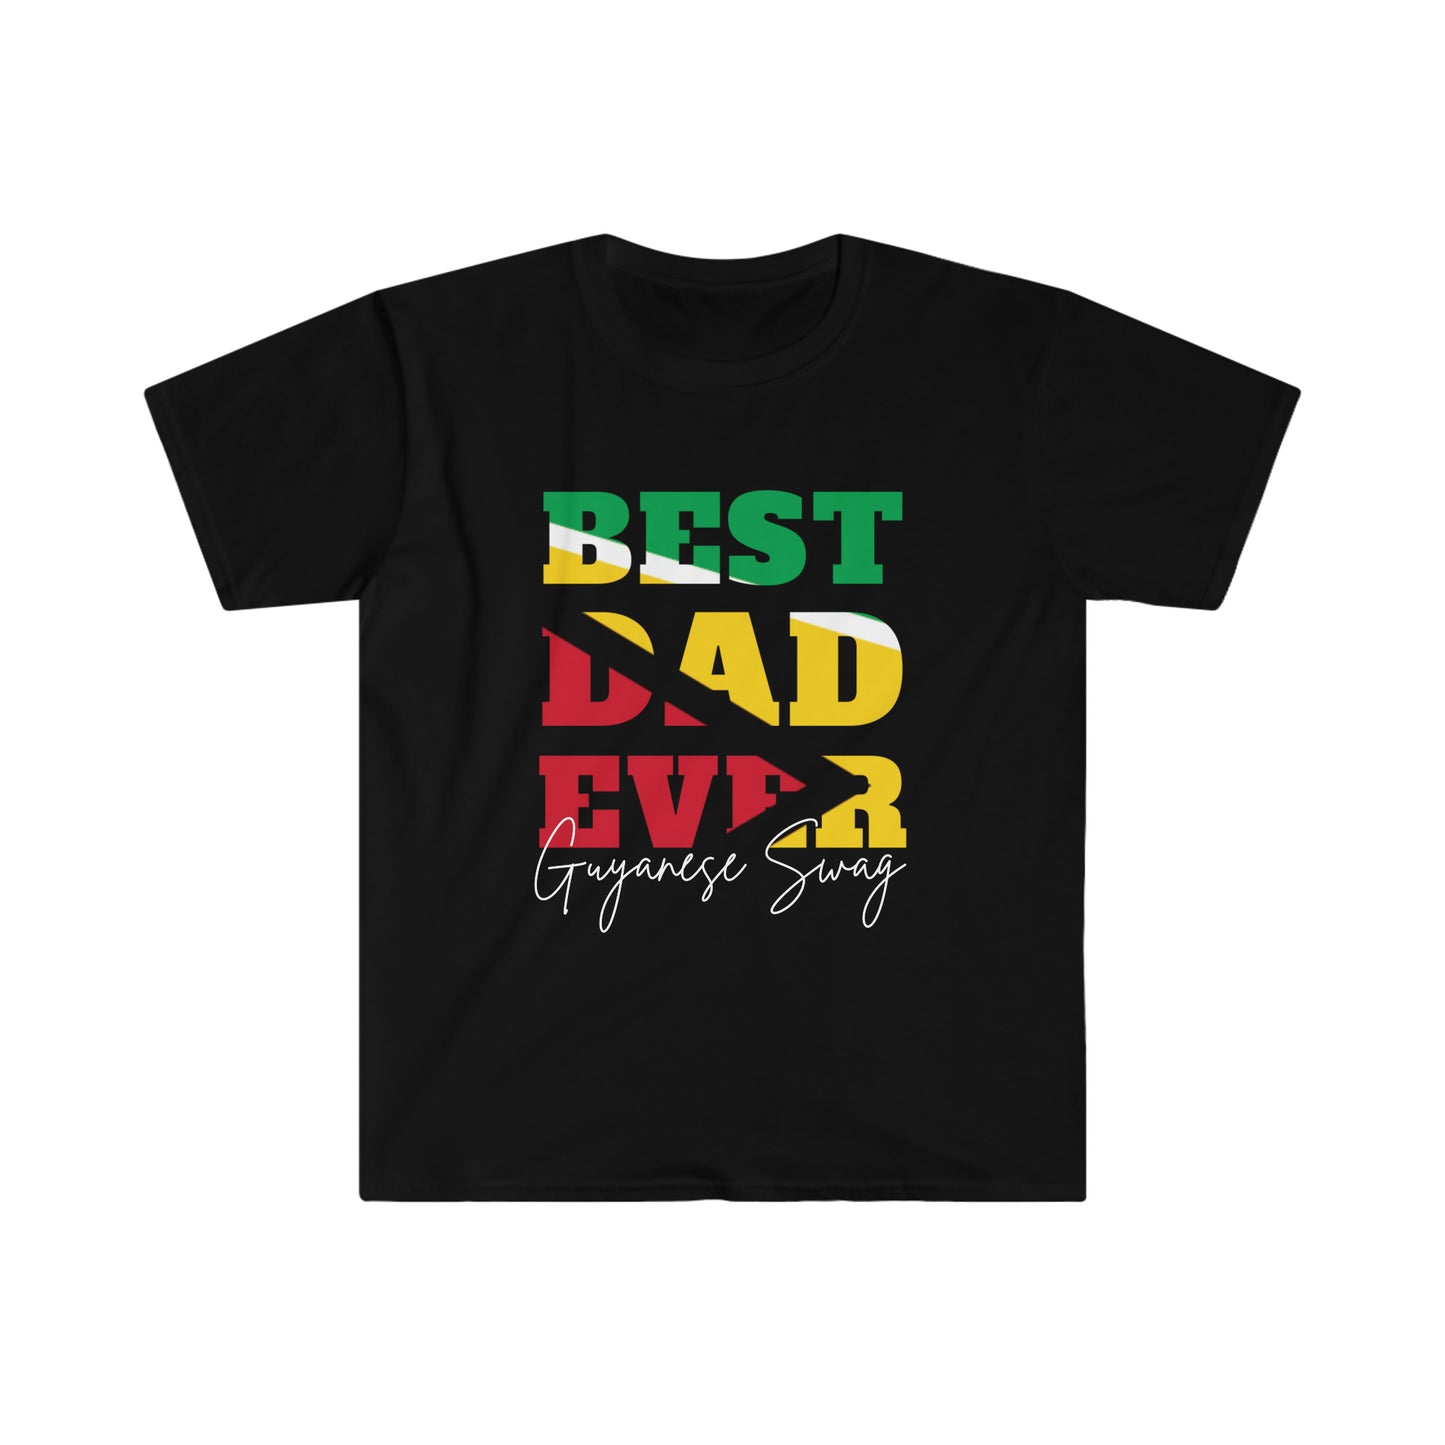 Father's Day Best Dad Ever Men Soft Style Shirt Sleeve T-Shirt by Guyanese Swag.